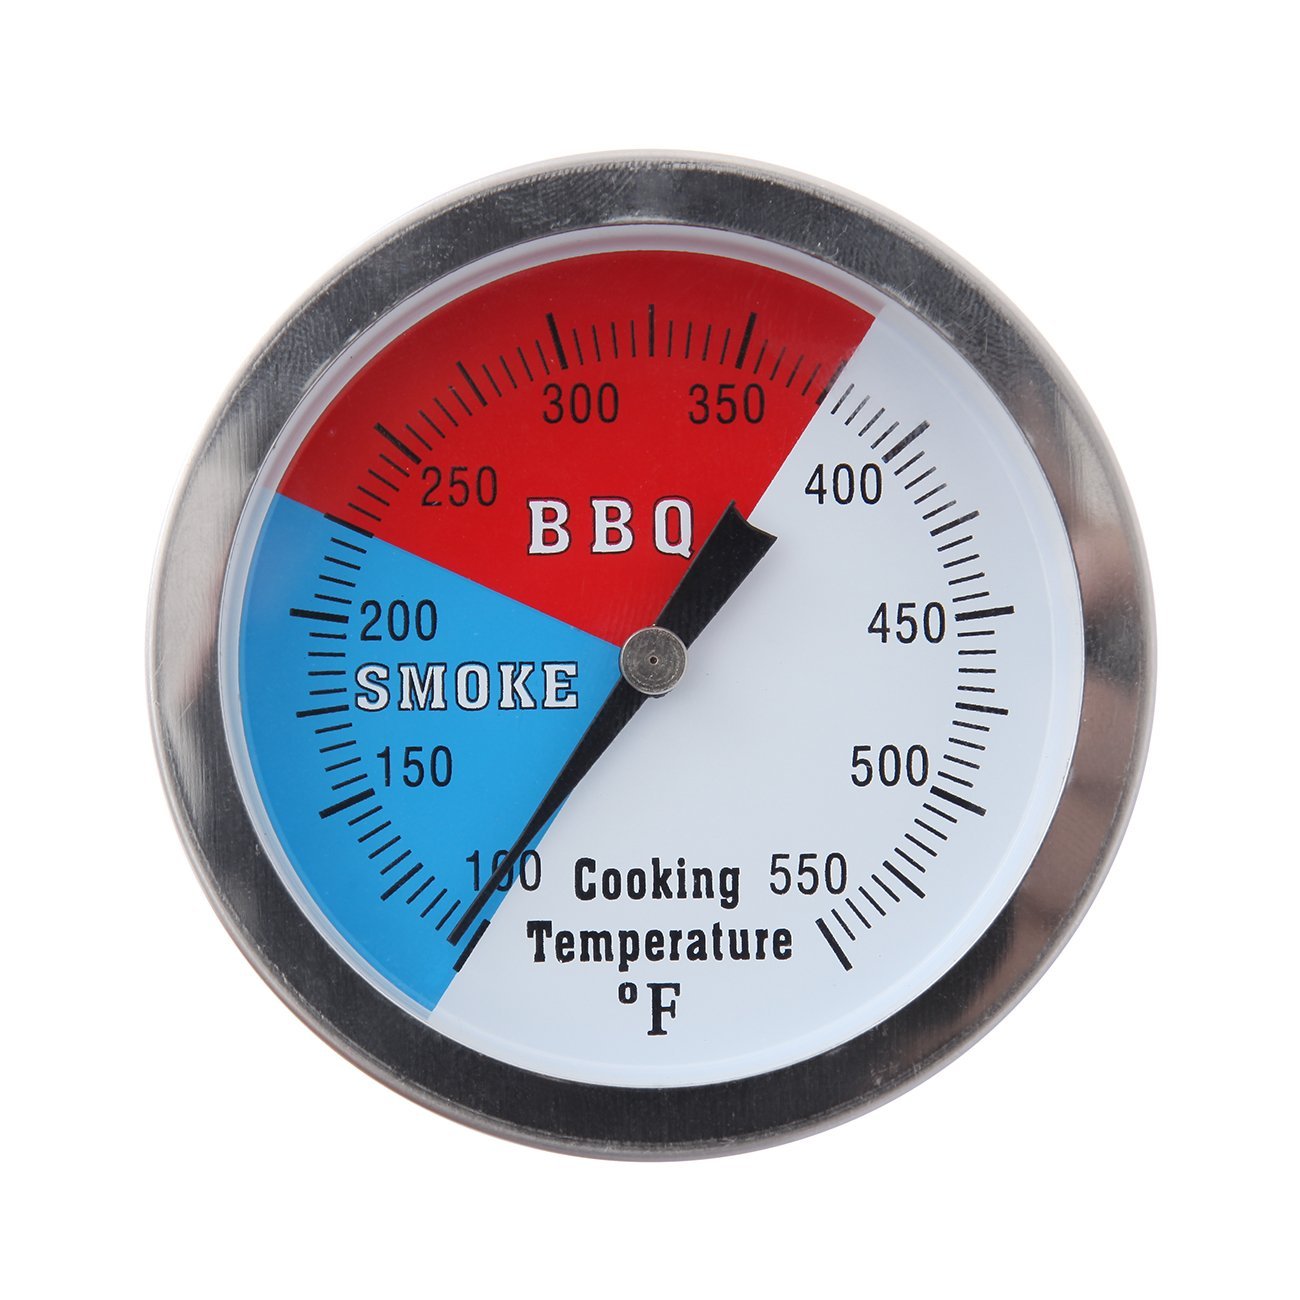 Larger Face 550F BBQ Barbecue Charcoal Grill Pit Wood Smoker Temp Gauge Grill Thermometer 3